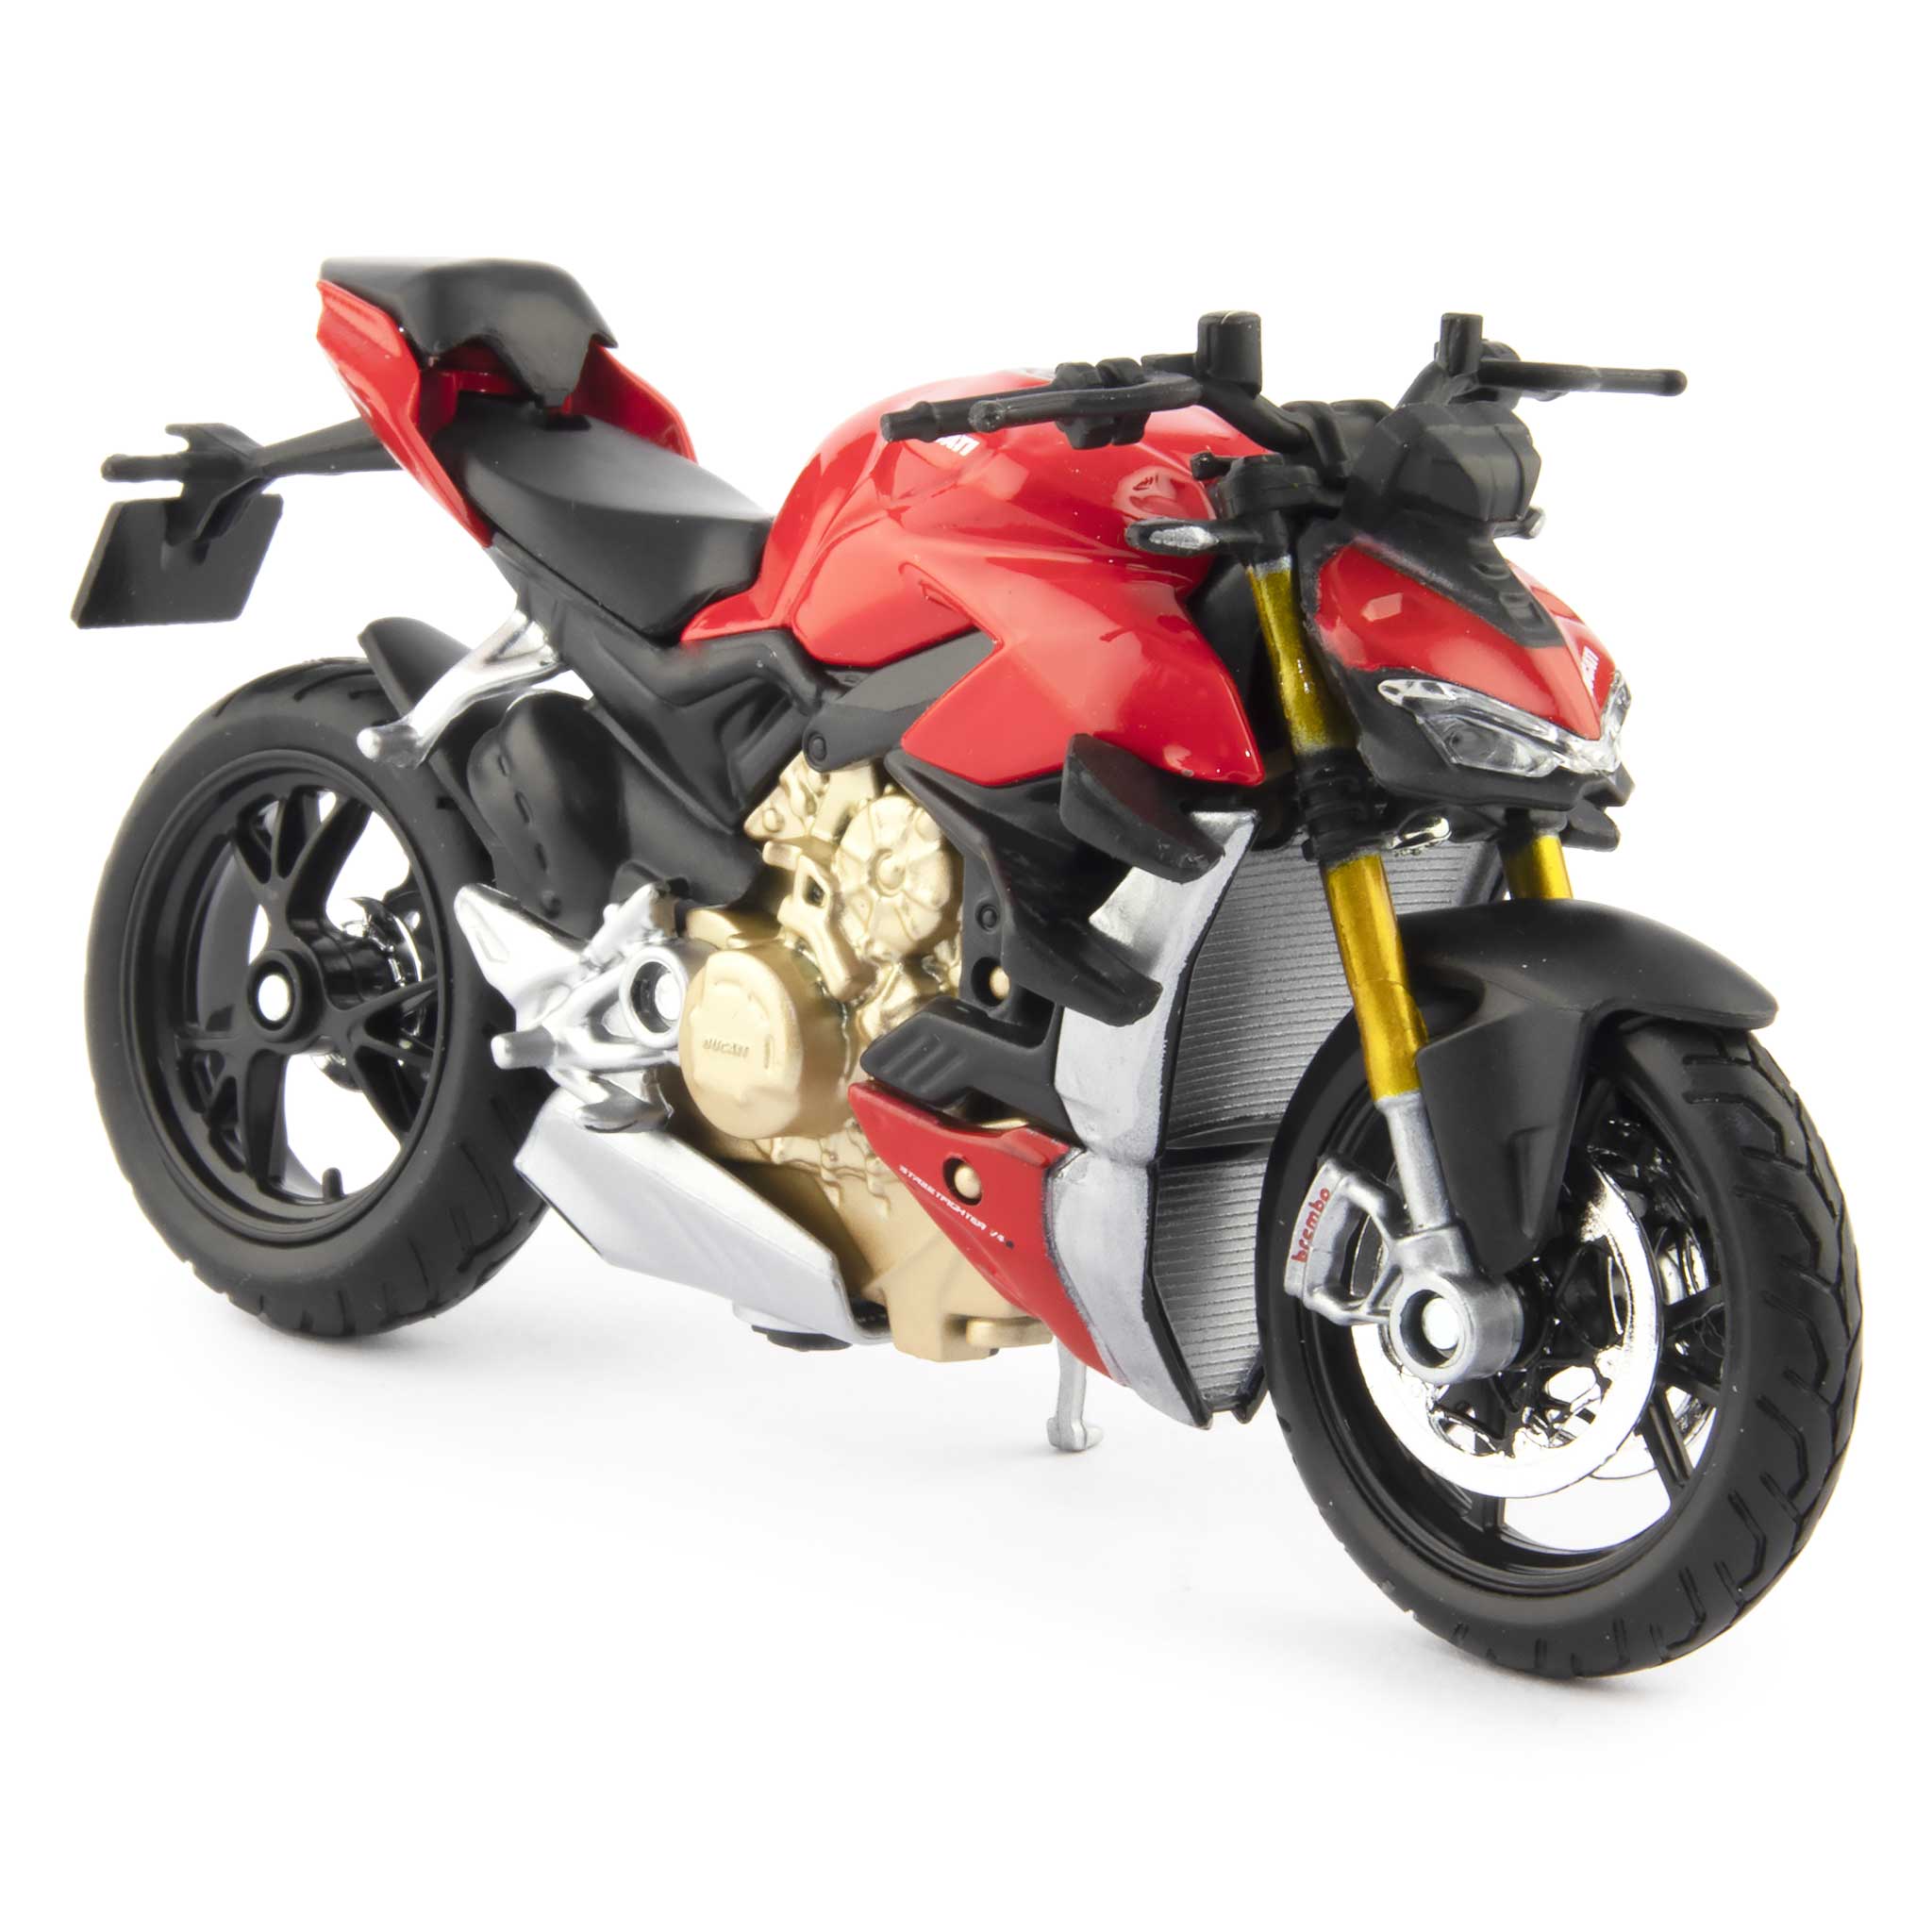 Ducati Streetfighter V4 S Diecast Model Motorcycle red - 1:18 scale-Maisto-Diecast Model Centre